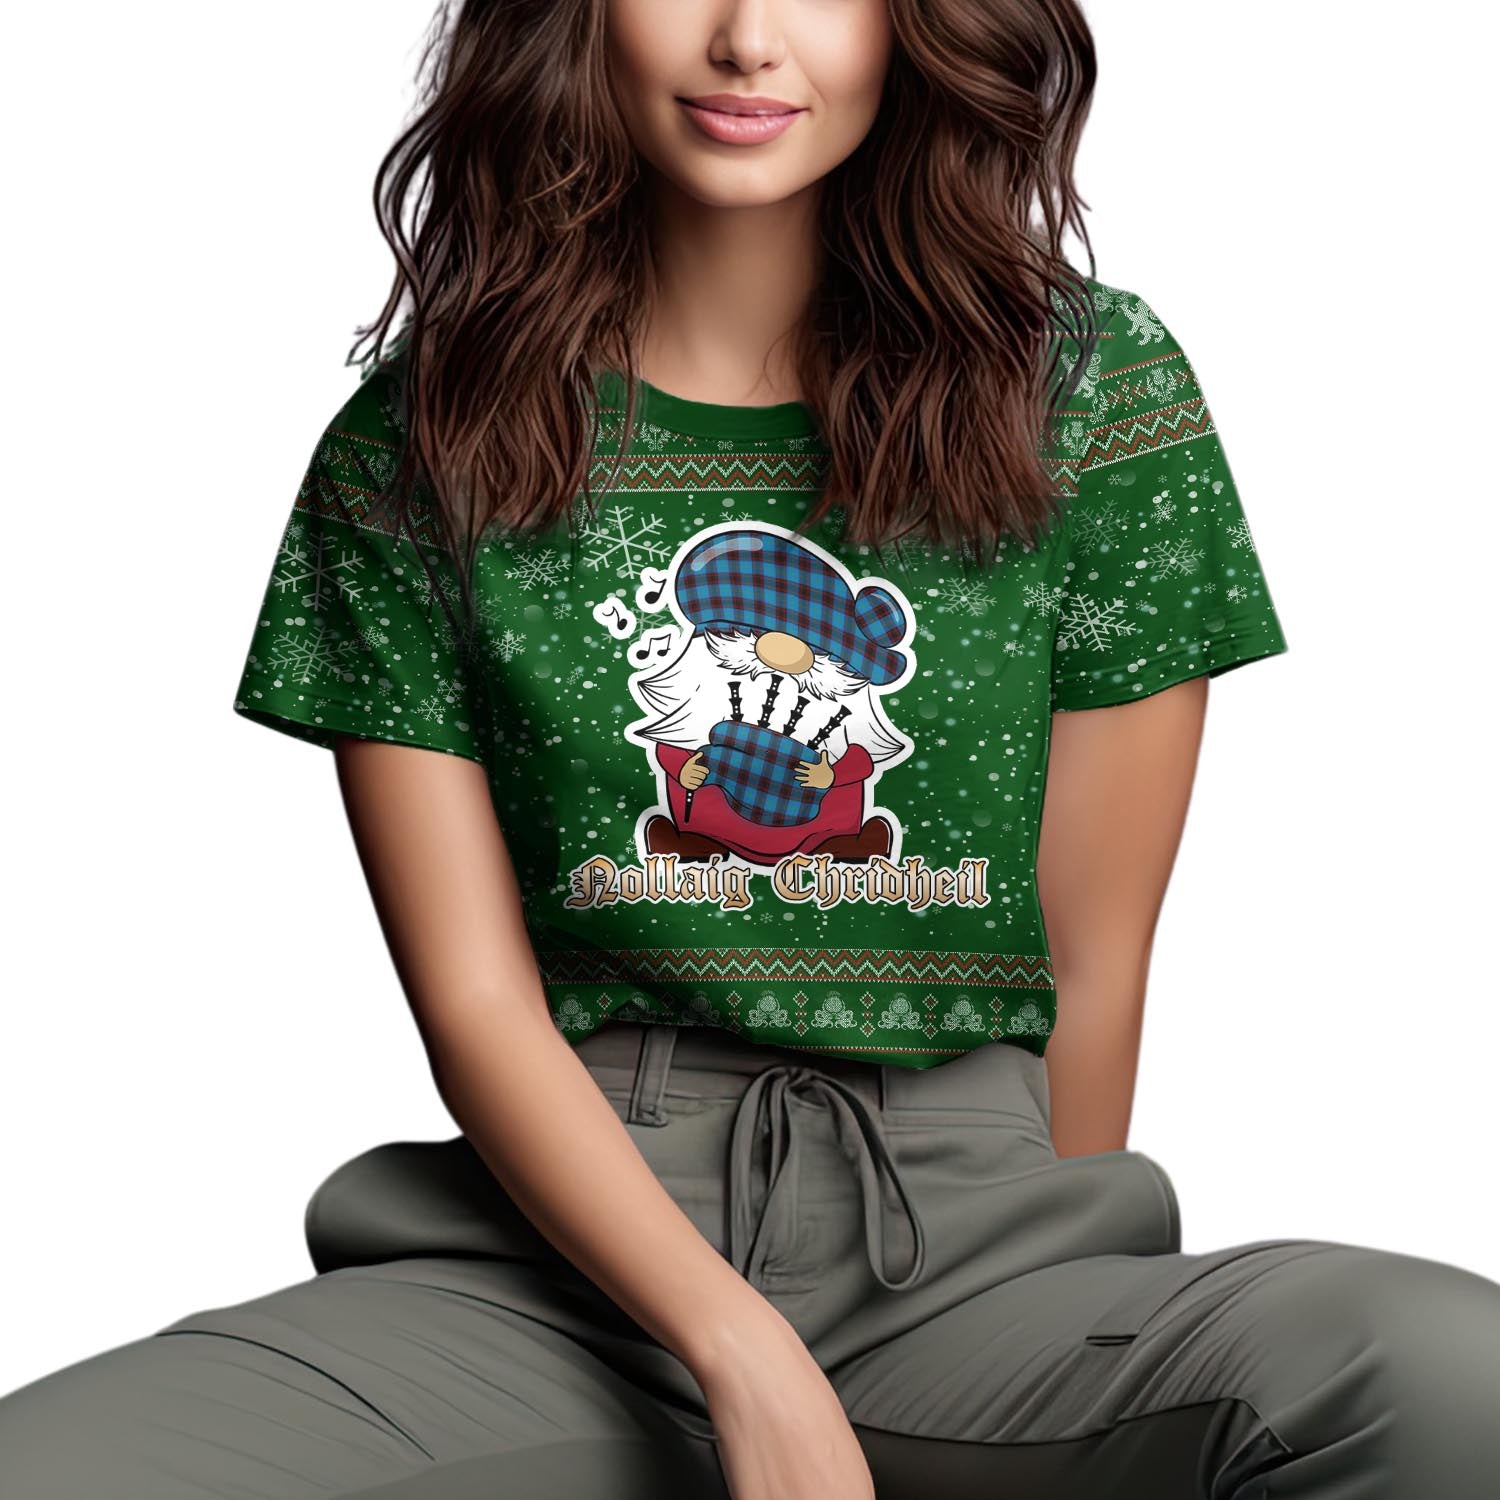 Home Ancient Clan Christmas Family T-Shirt with Funny Gnome Playing Bagpipes Women's Shirt Green - Tartanvibesclothing